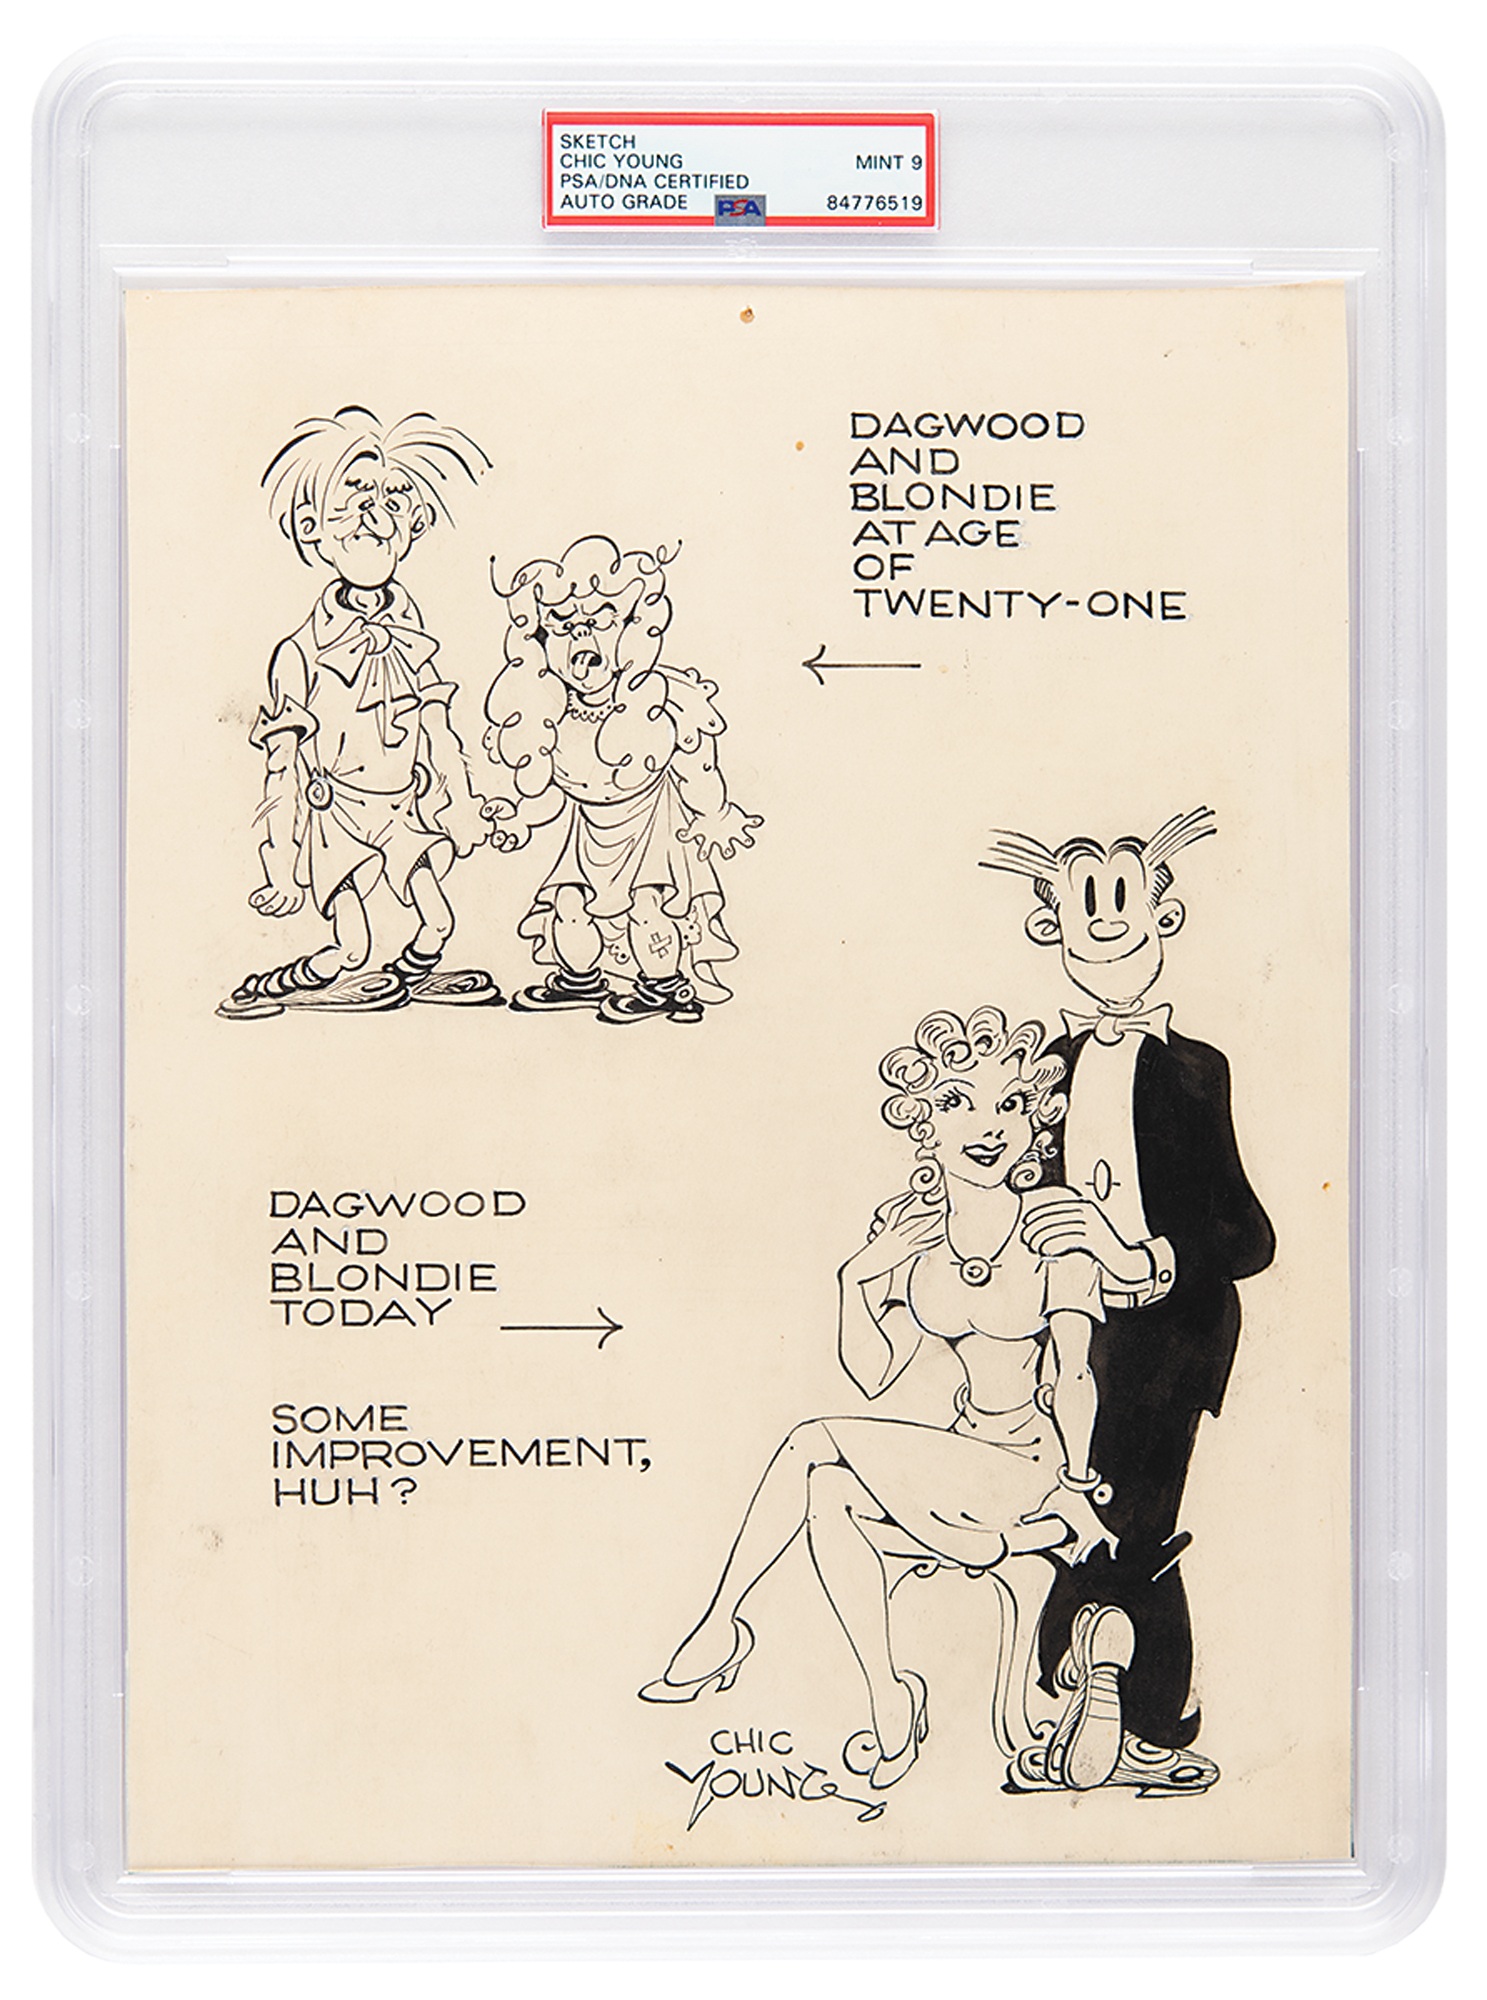 Lot #7210 Chic Young Signed Sketch of Dagwood and Blondie - PSA MINT 9